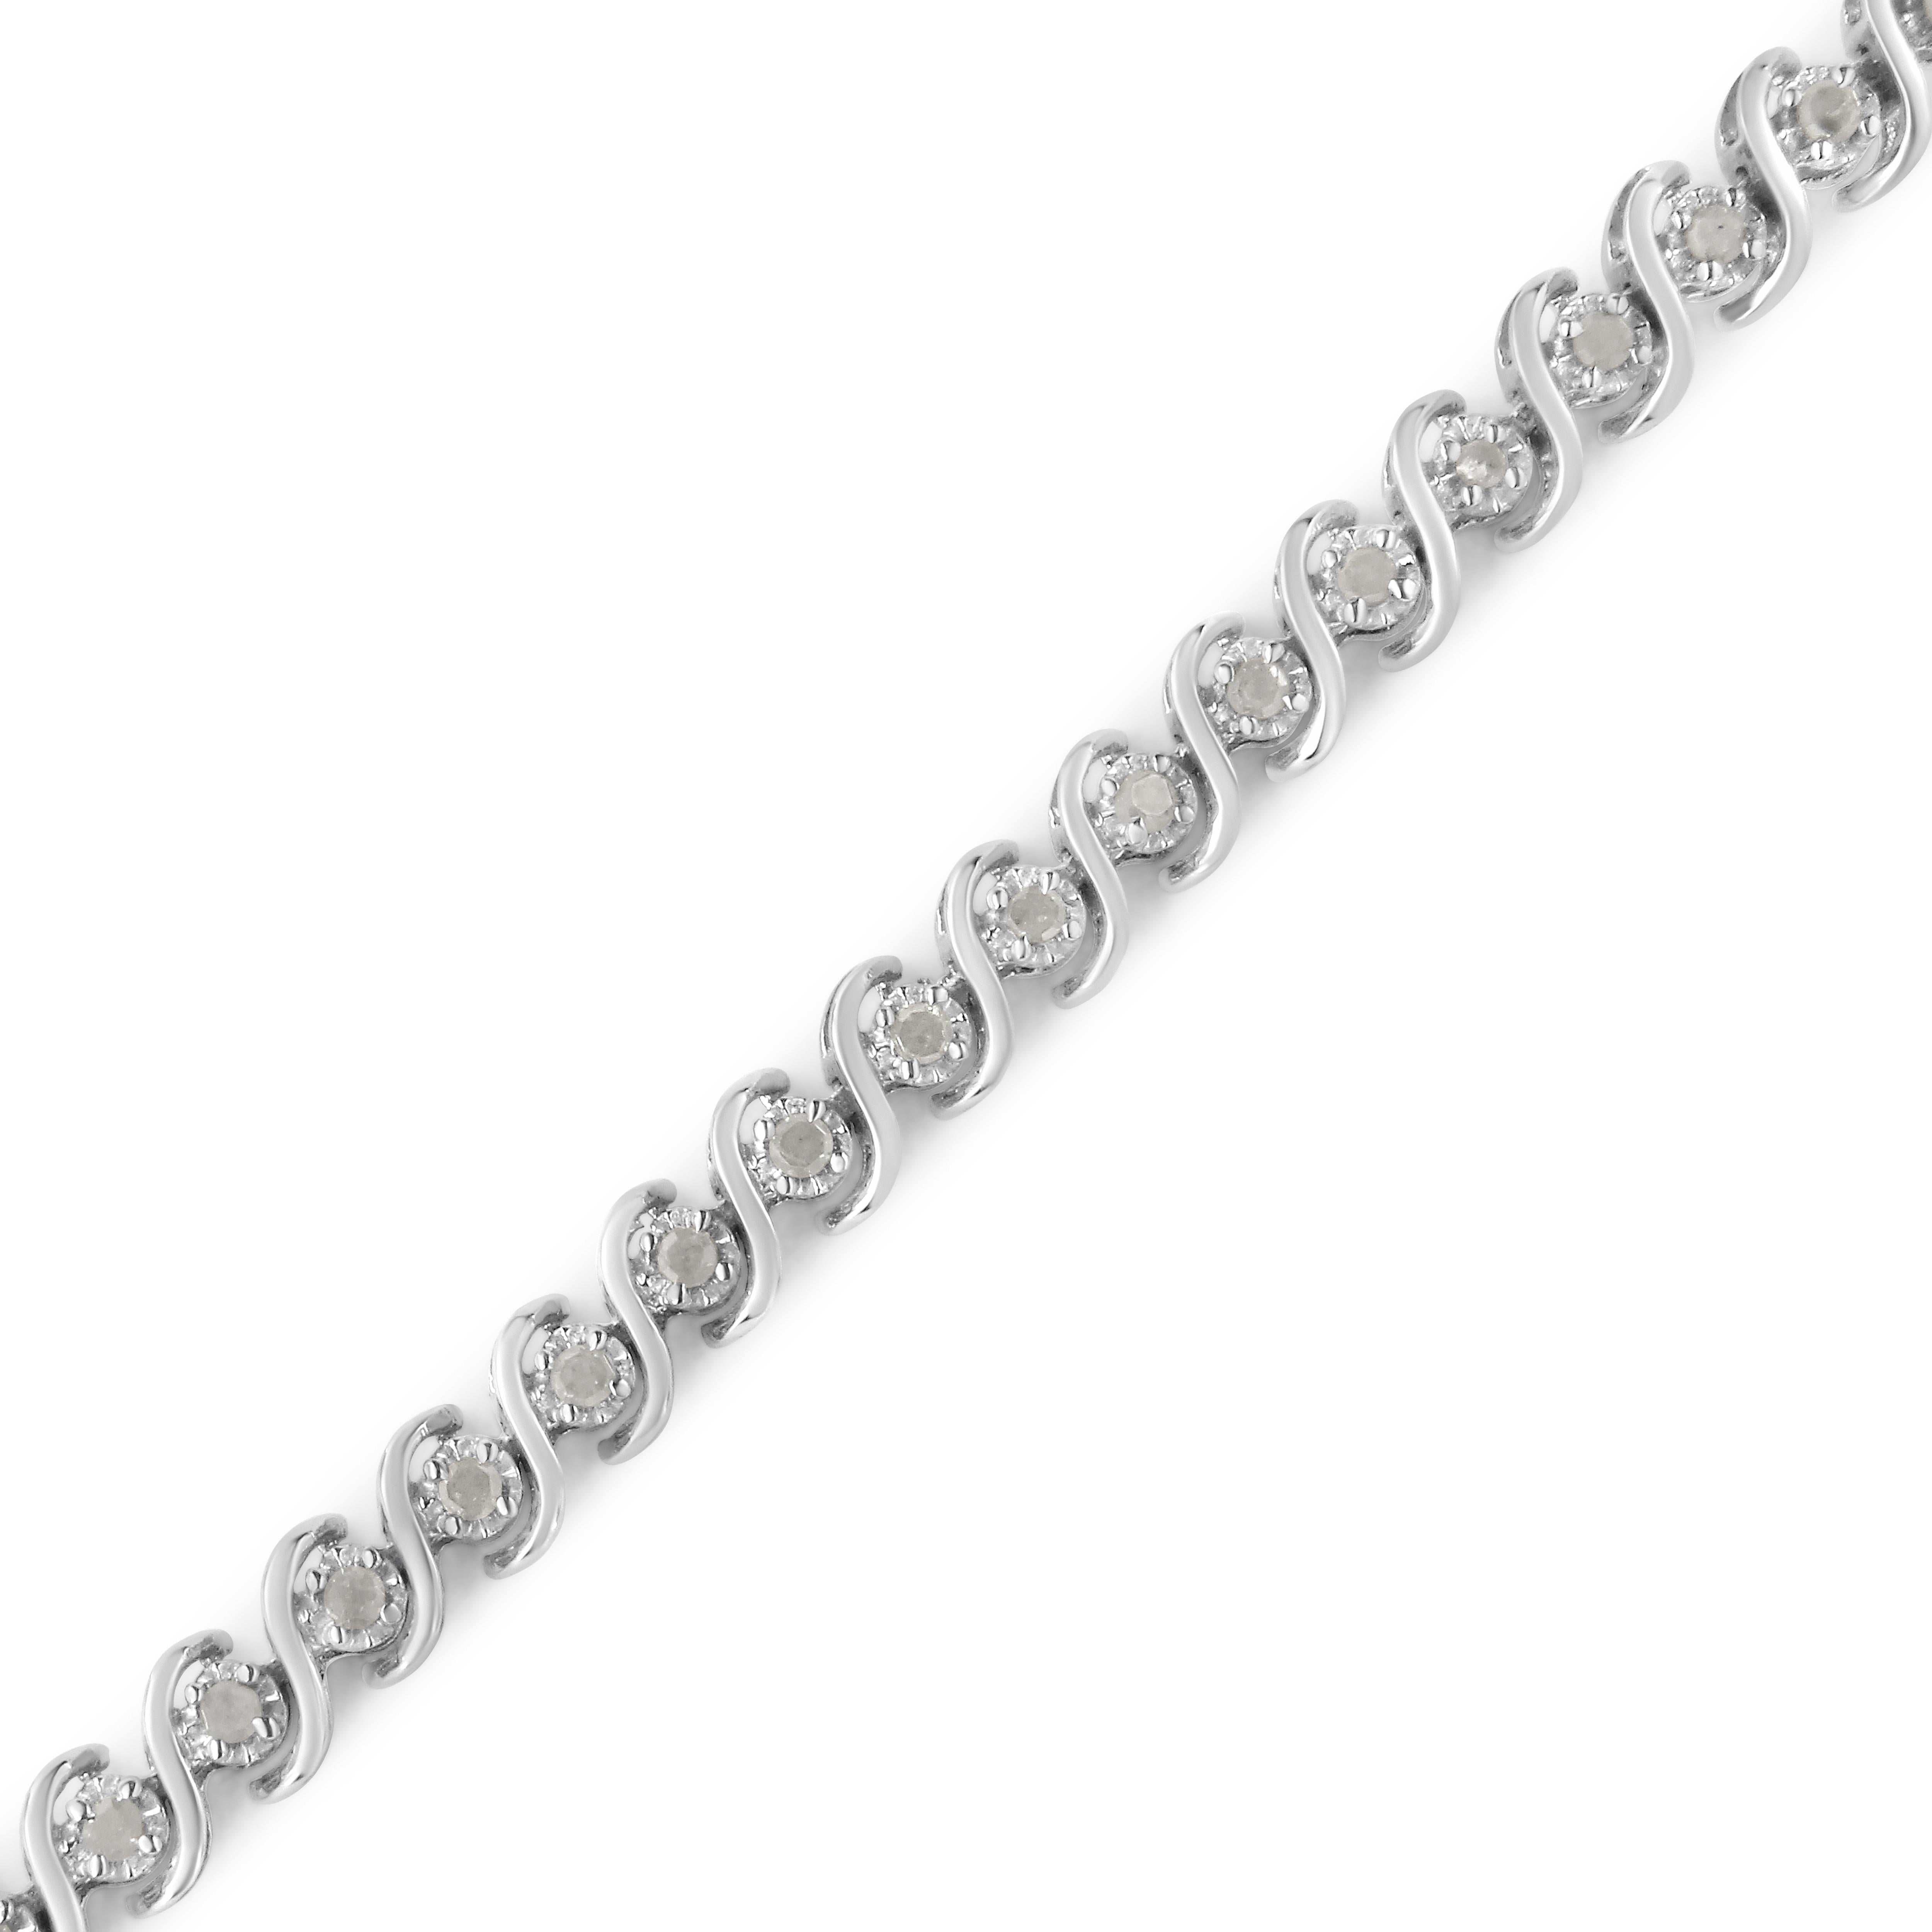 Amplifying your visual presence is the aim of this stunning tennis bracelet which has been designed to shine the spotlight on any one’s personal taste. Impeccably crafted, this gold-plated diamond bracelet is made to the highest of standards. With a